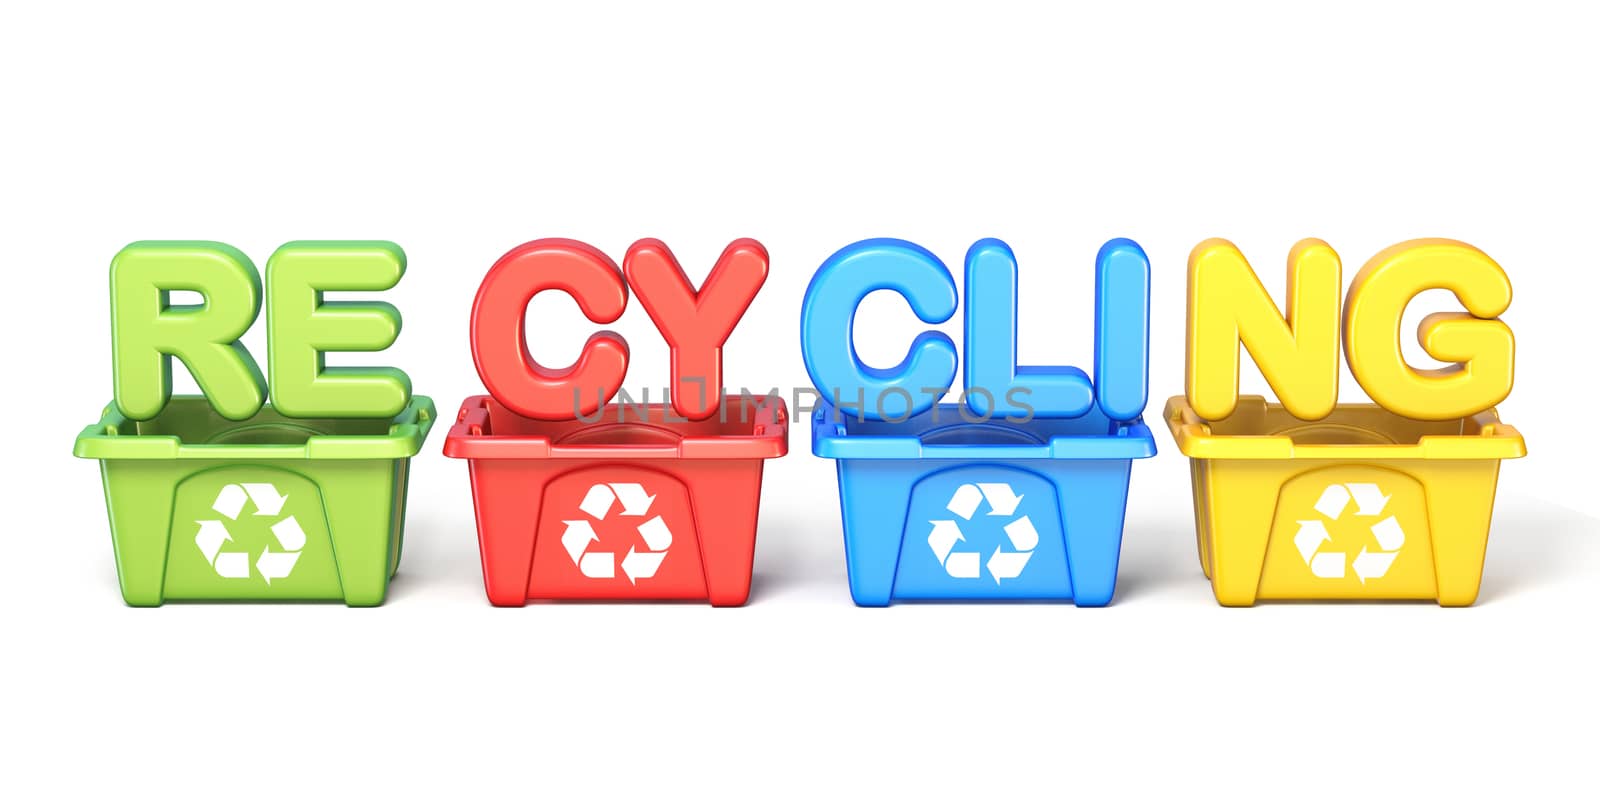 Recycle bins with text RECYCLING 3D by djmilic